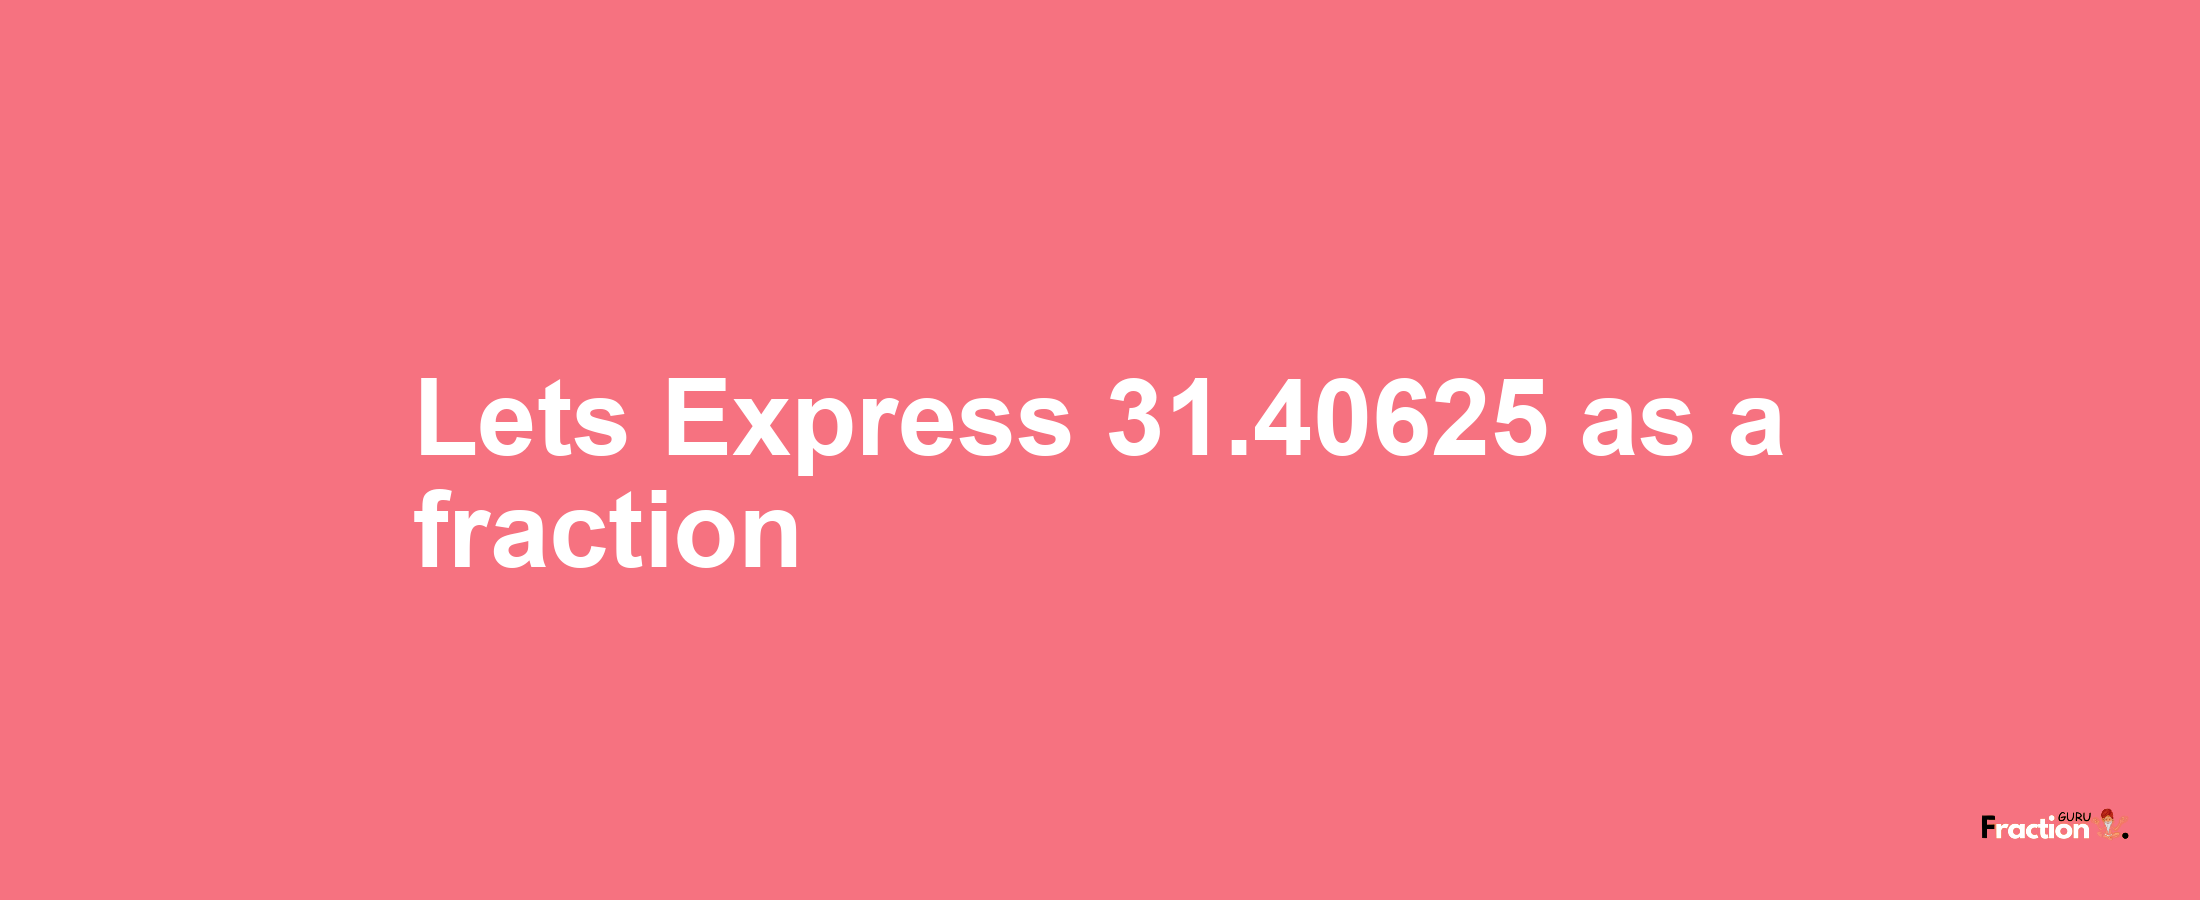 Lets Express 31.40625 as afraction